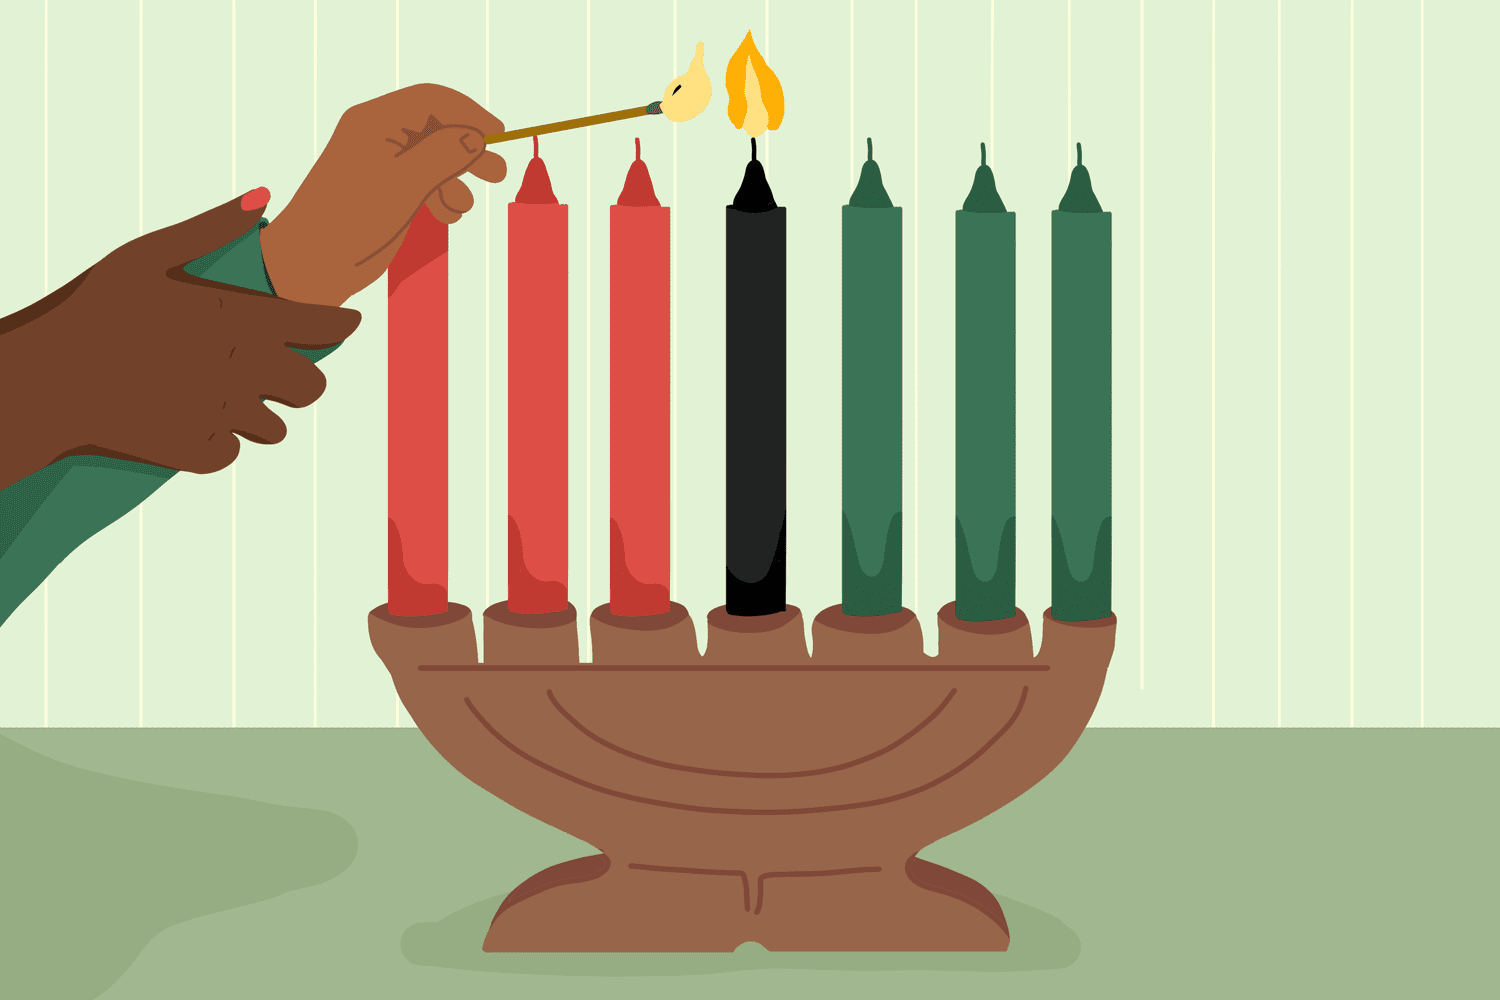 An illustration of a Kinara being lit for Kwanzaa by a parent and child.